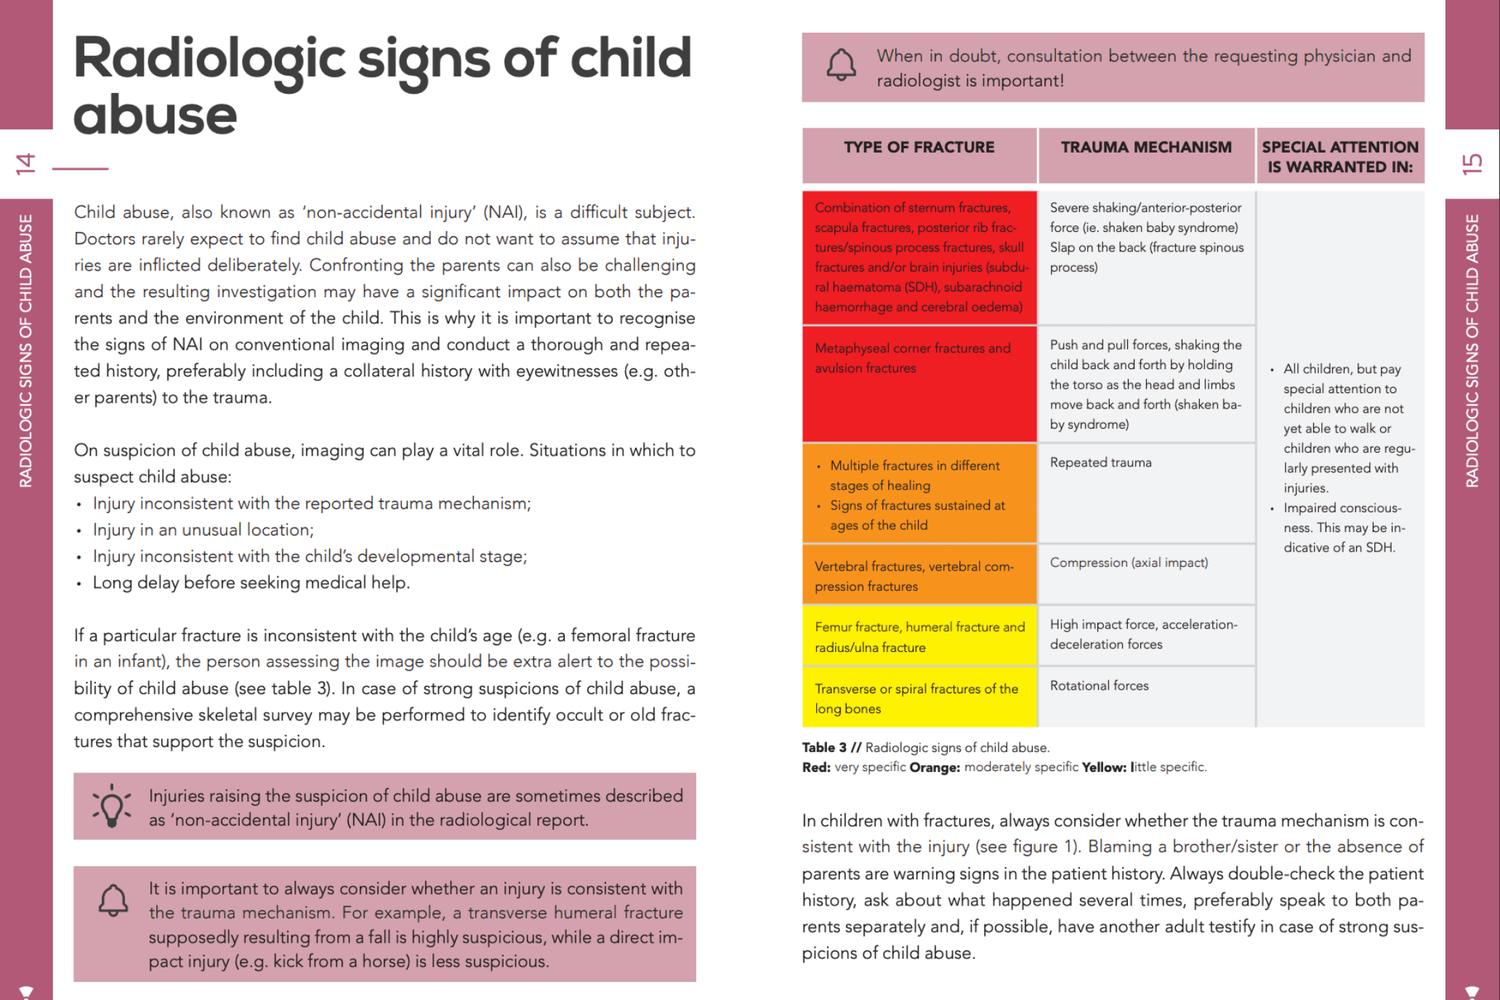 Preview Radiology book - radiologic signs of child abuse